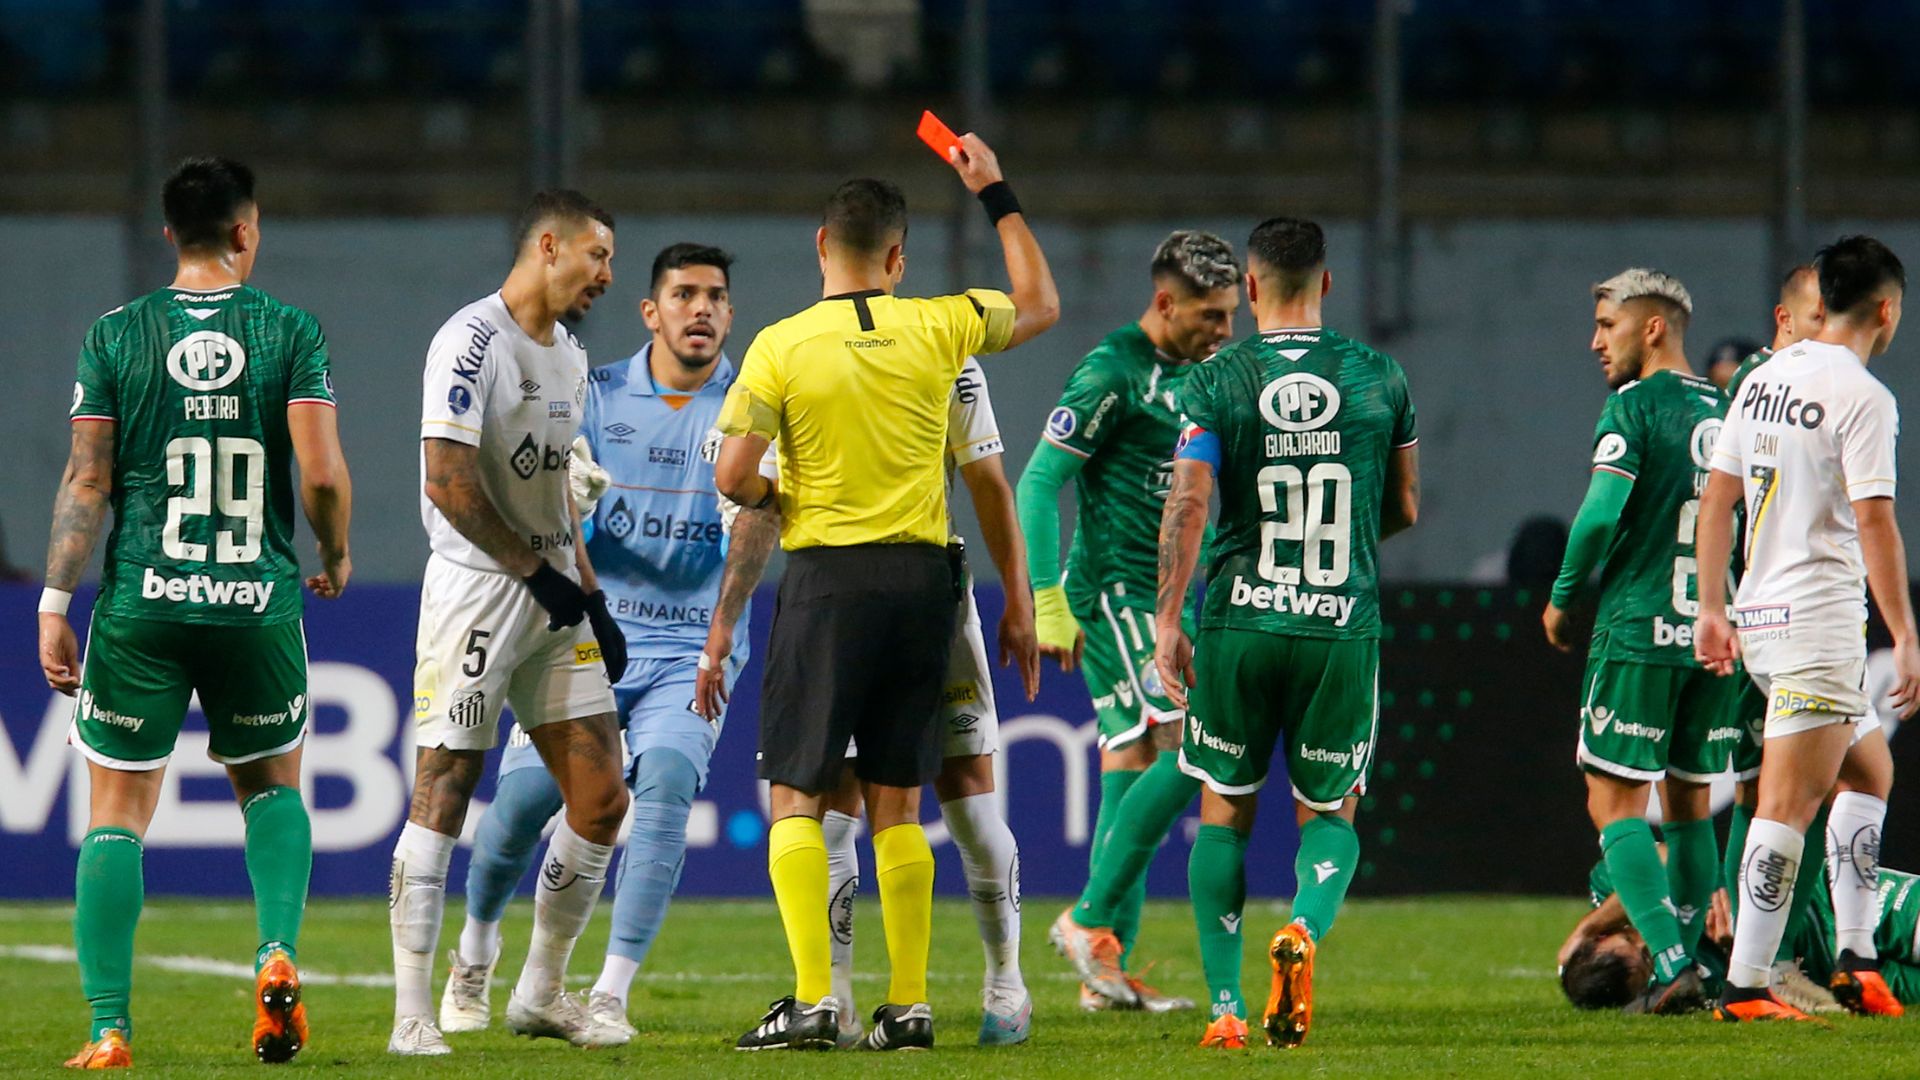 Joaquim is sent off in the first half